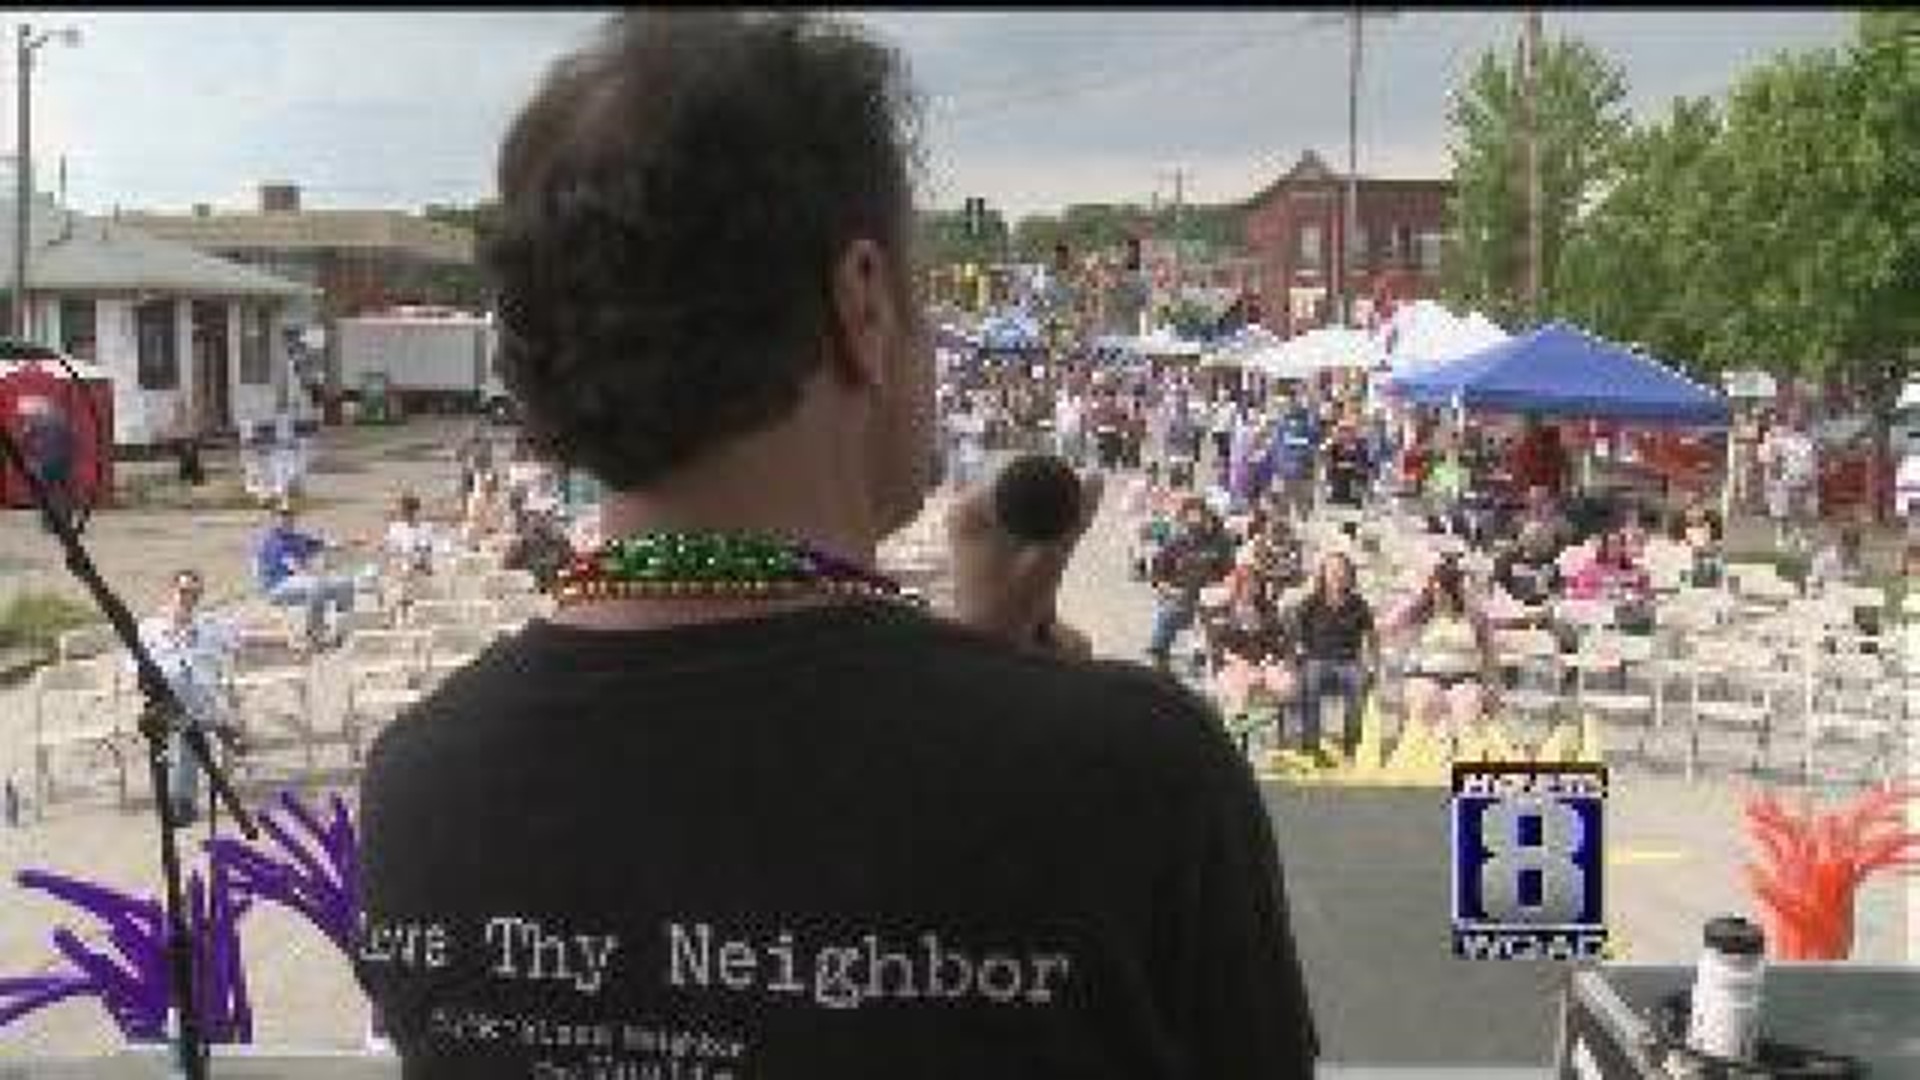 Pridefest weigh in on marriage equality